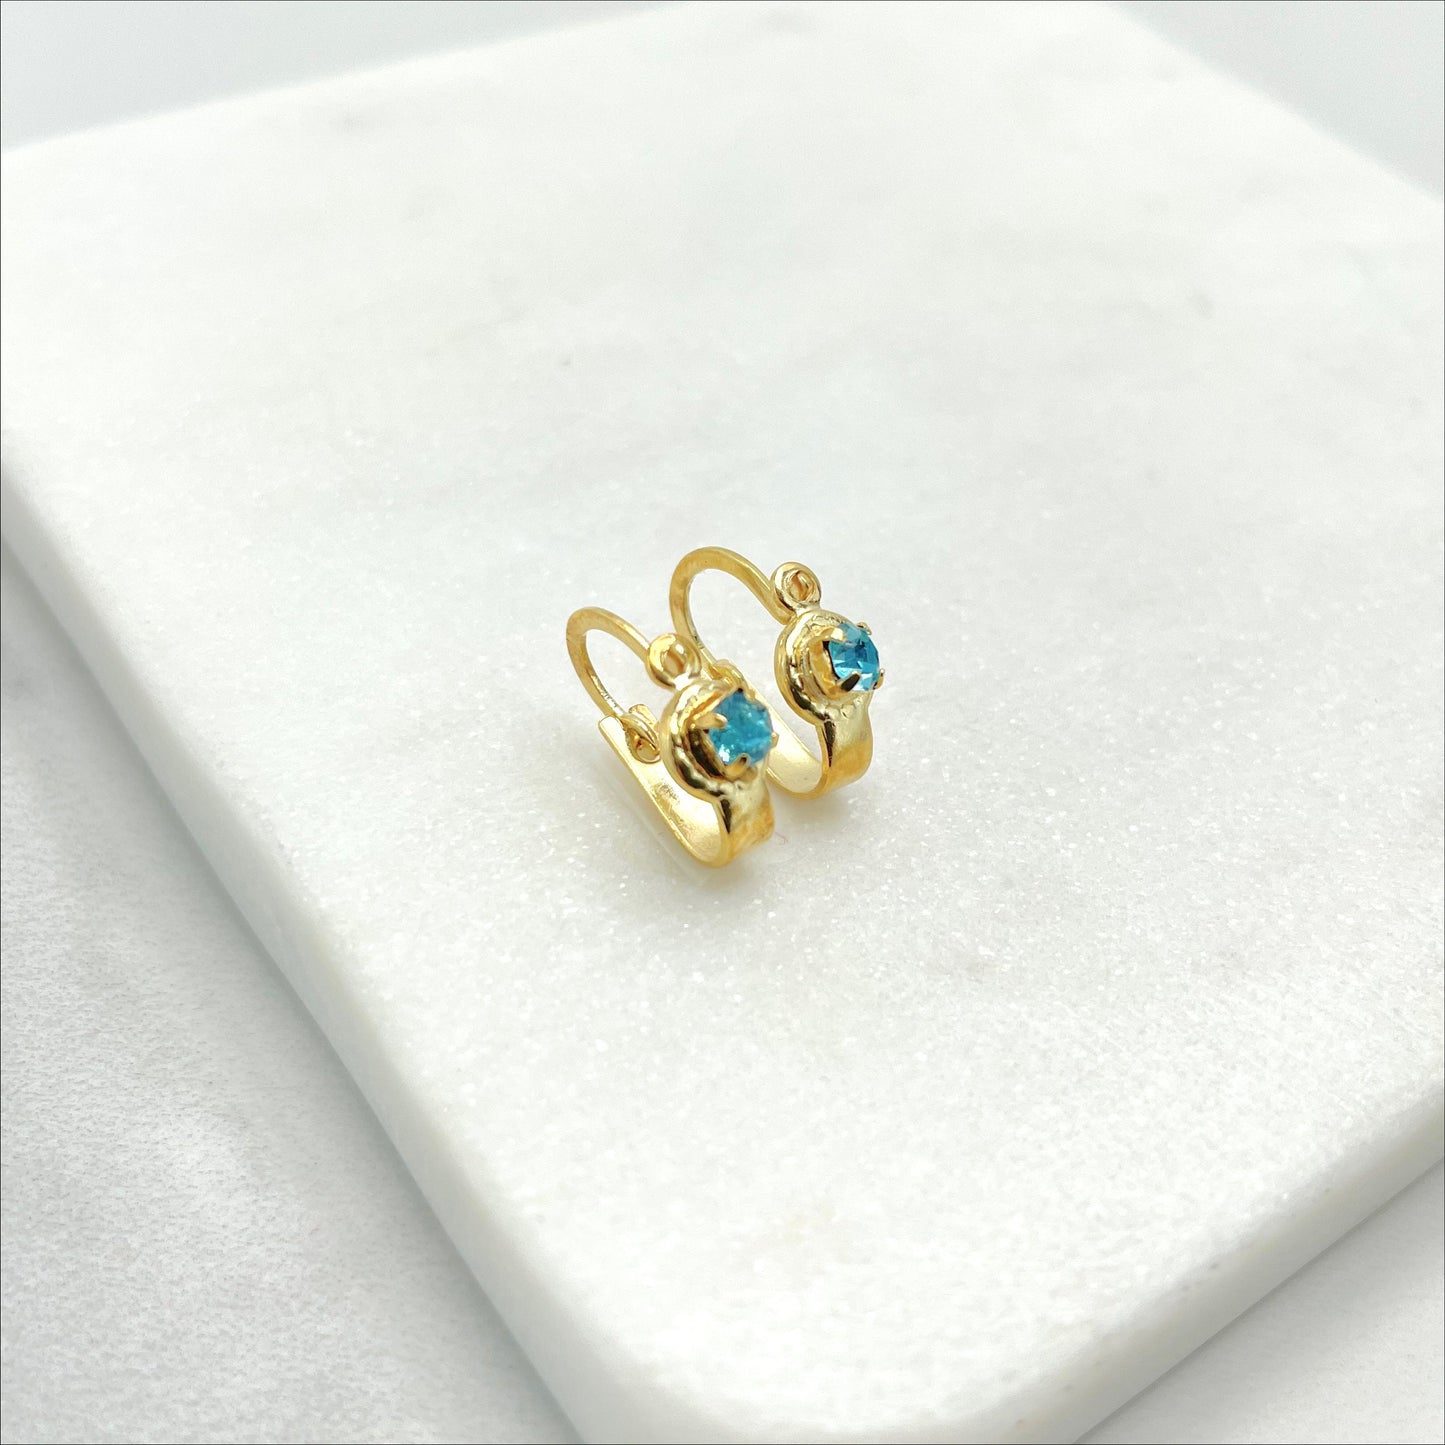 18k Gold Filled Colored Cubic Zirconia Jacket Earrings for kids, Clear, Light Blue or Pink CZ, Wholesale Jewelry Making Supplies